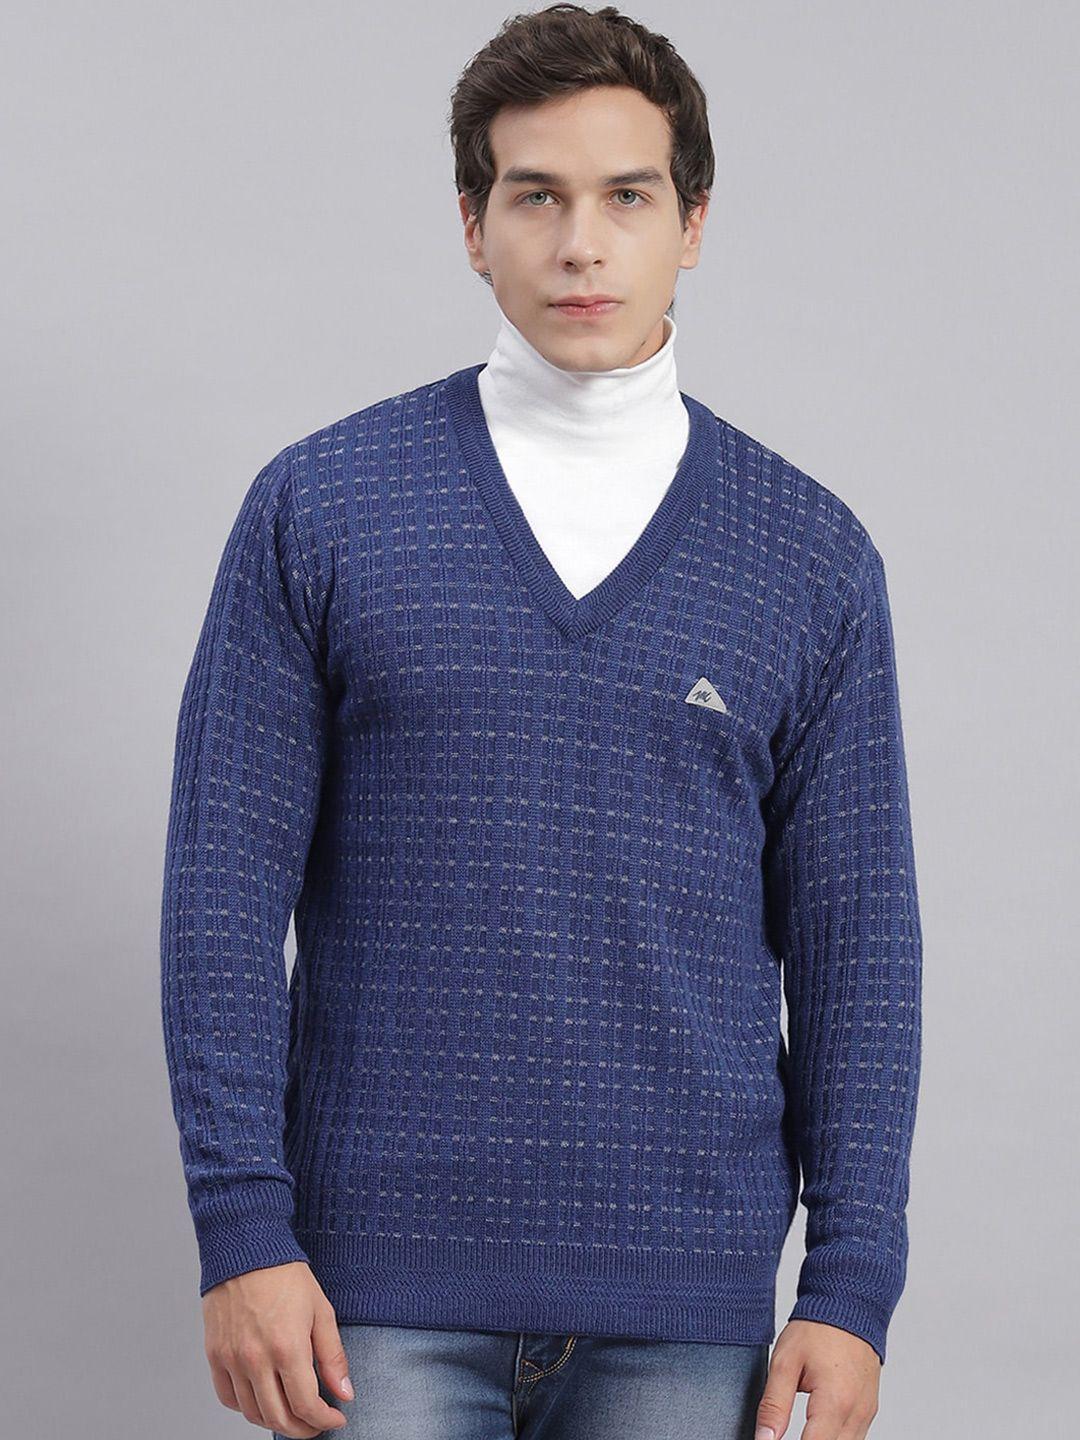 monte carlo v-neck cable knit pure woollen pullover